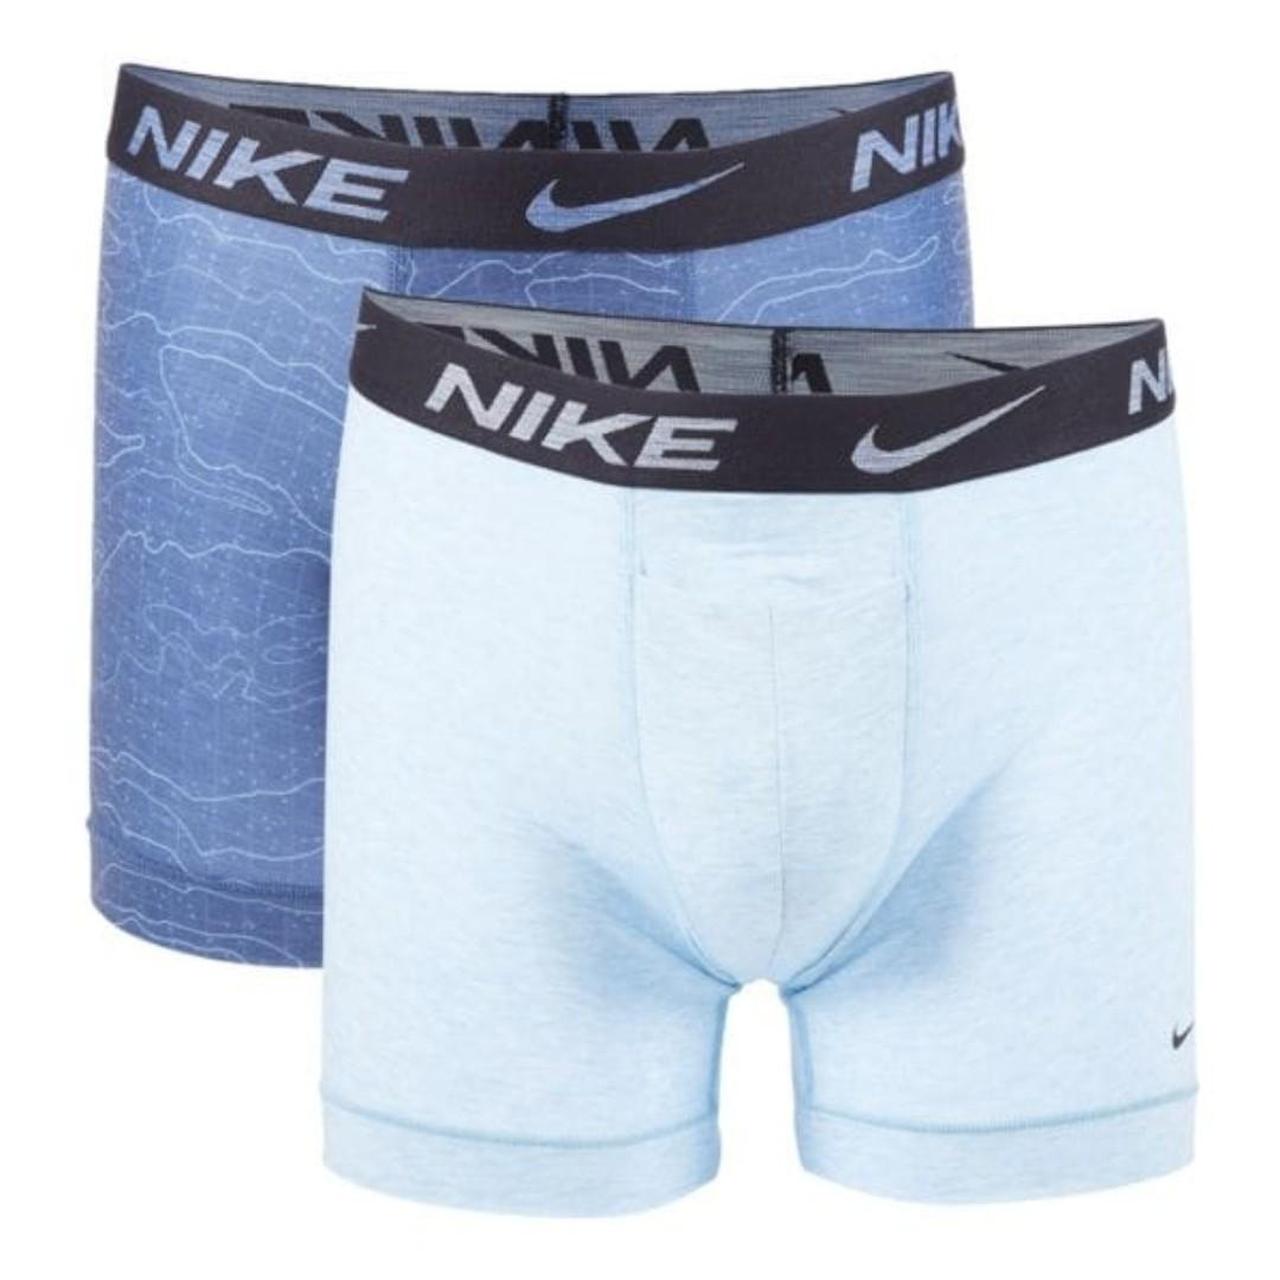 Nike Men's Blue and Navy Boxers-and-briefs (4)